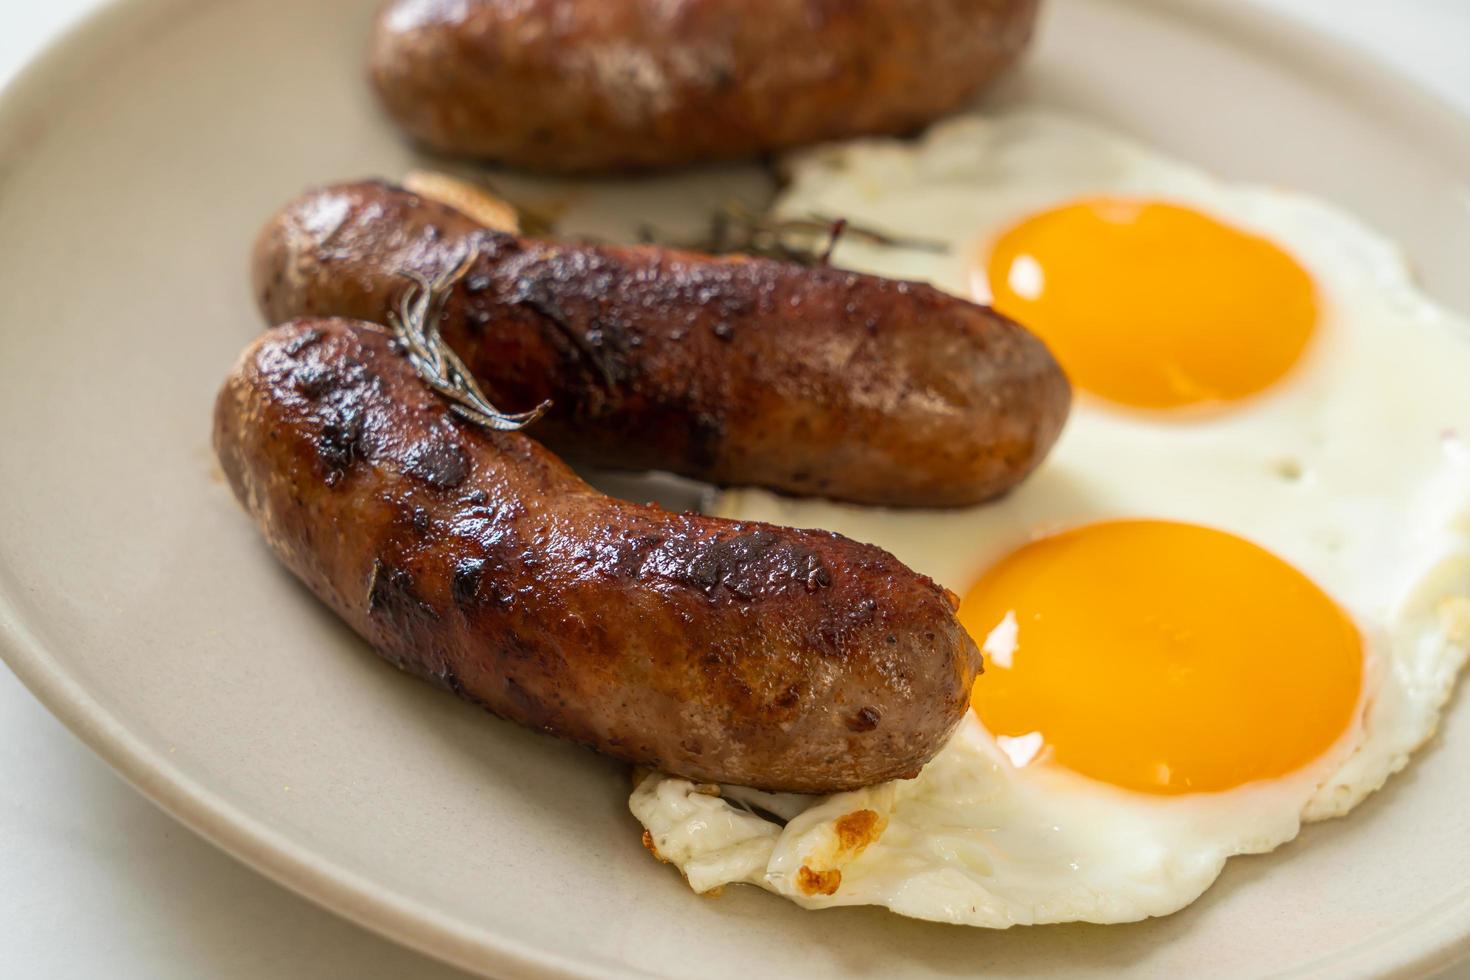 Homemade double fried egg with fried pork sausage - for breakfast photo